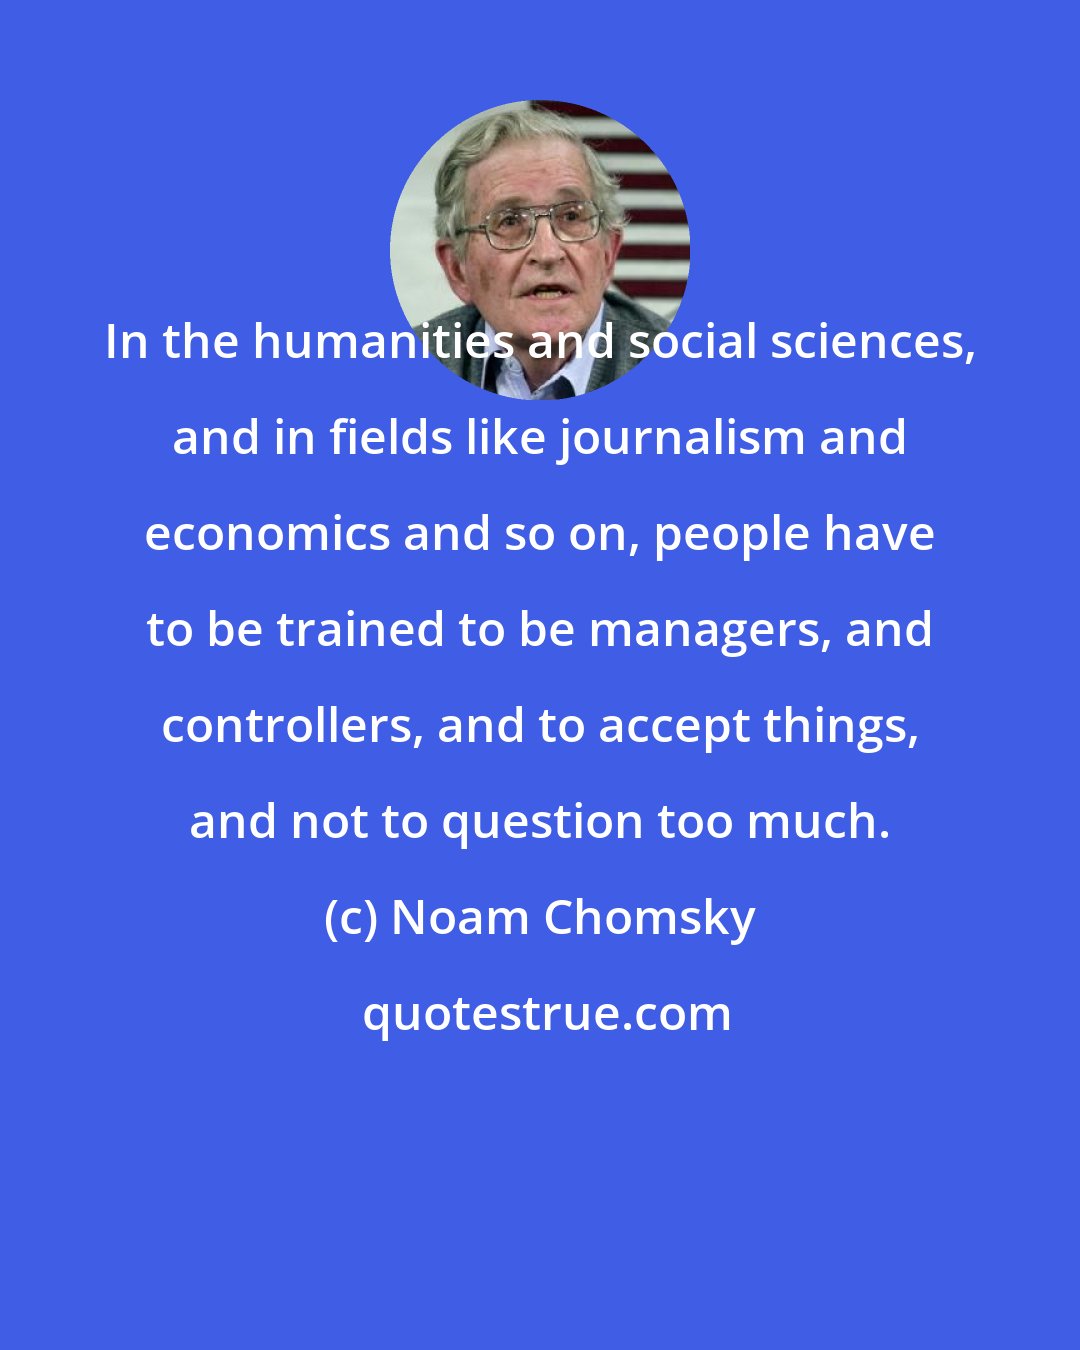 Noam Chomsky: In the humanities and social sciences, and in fields like journalism and economics and so on, people have to be trained to be managers, and controllers, and to accept things, and not to question too much.